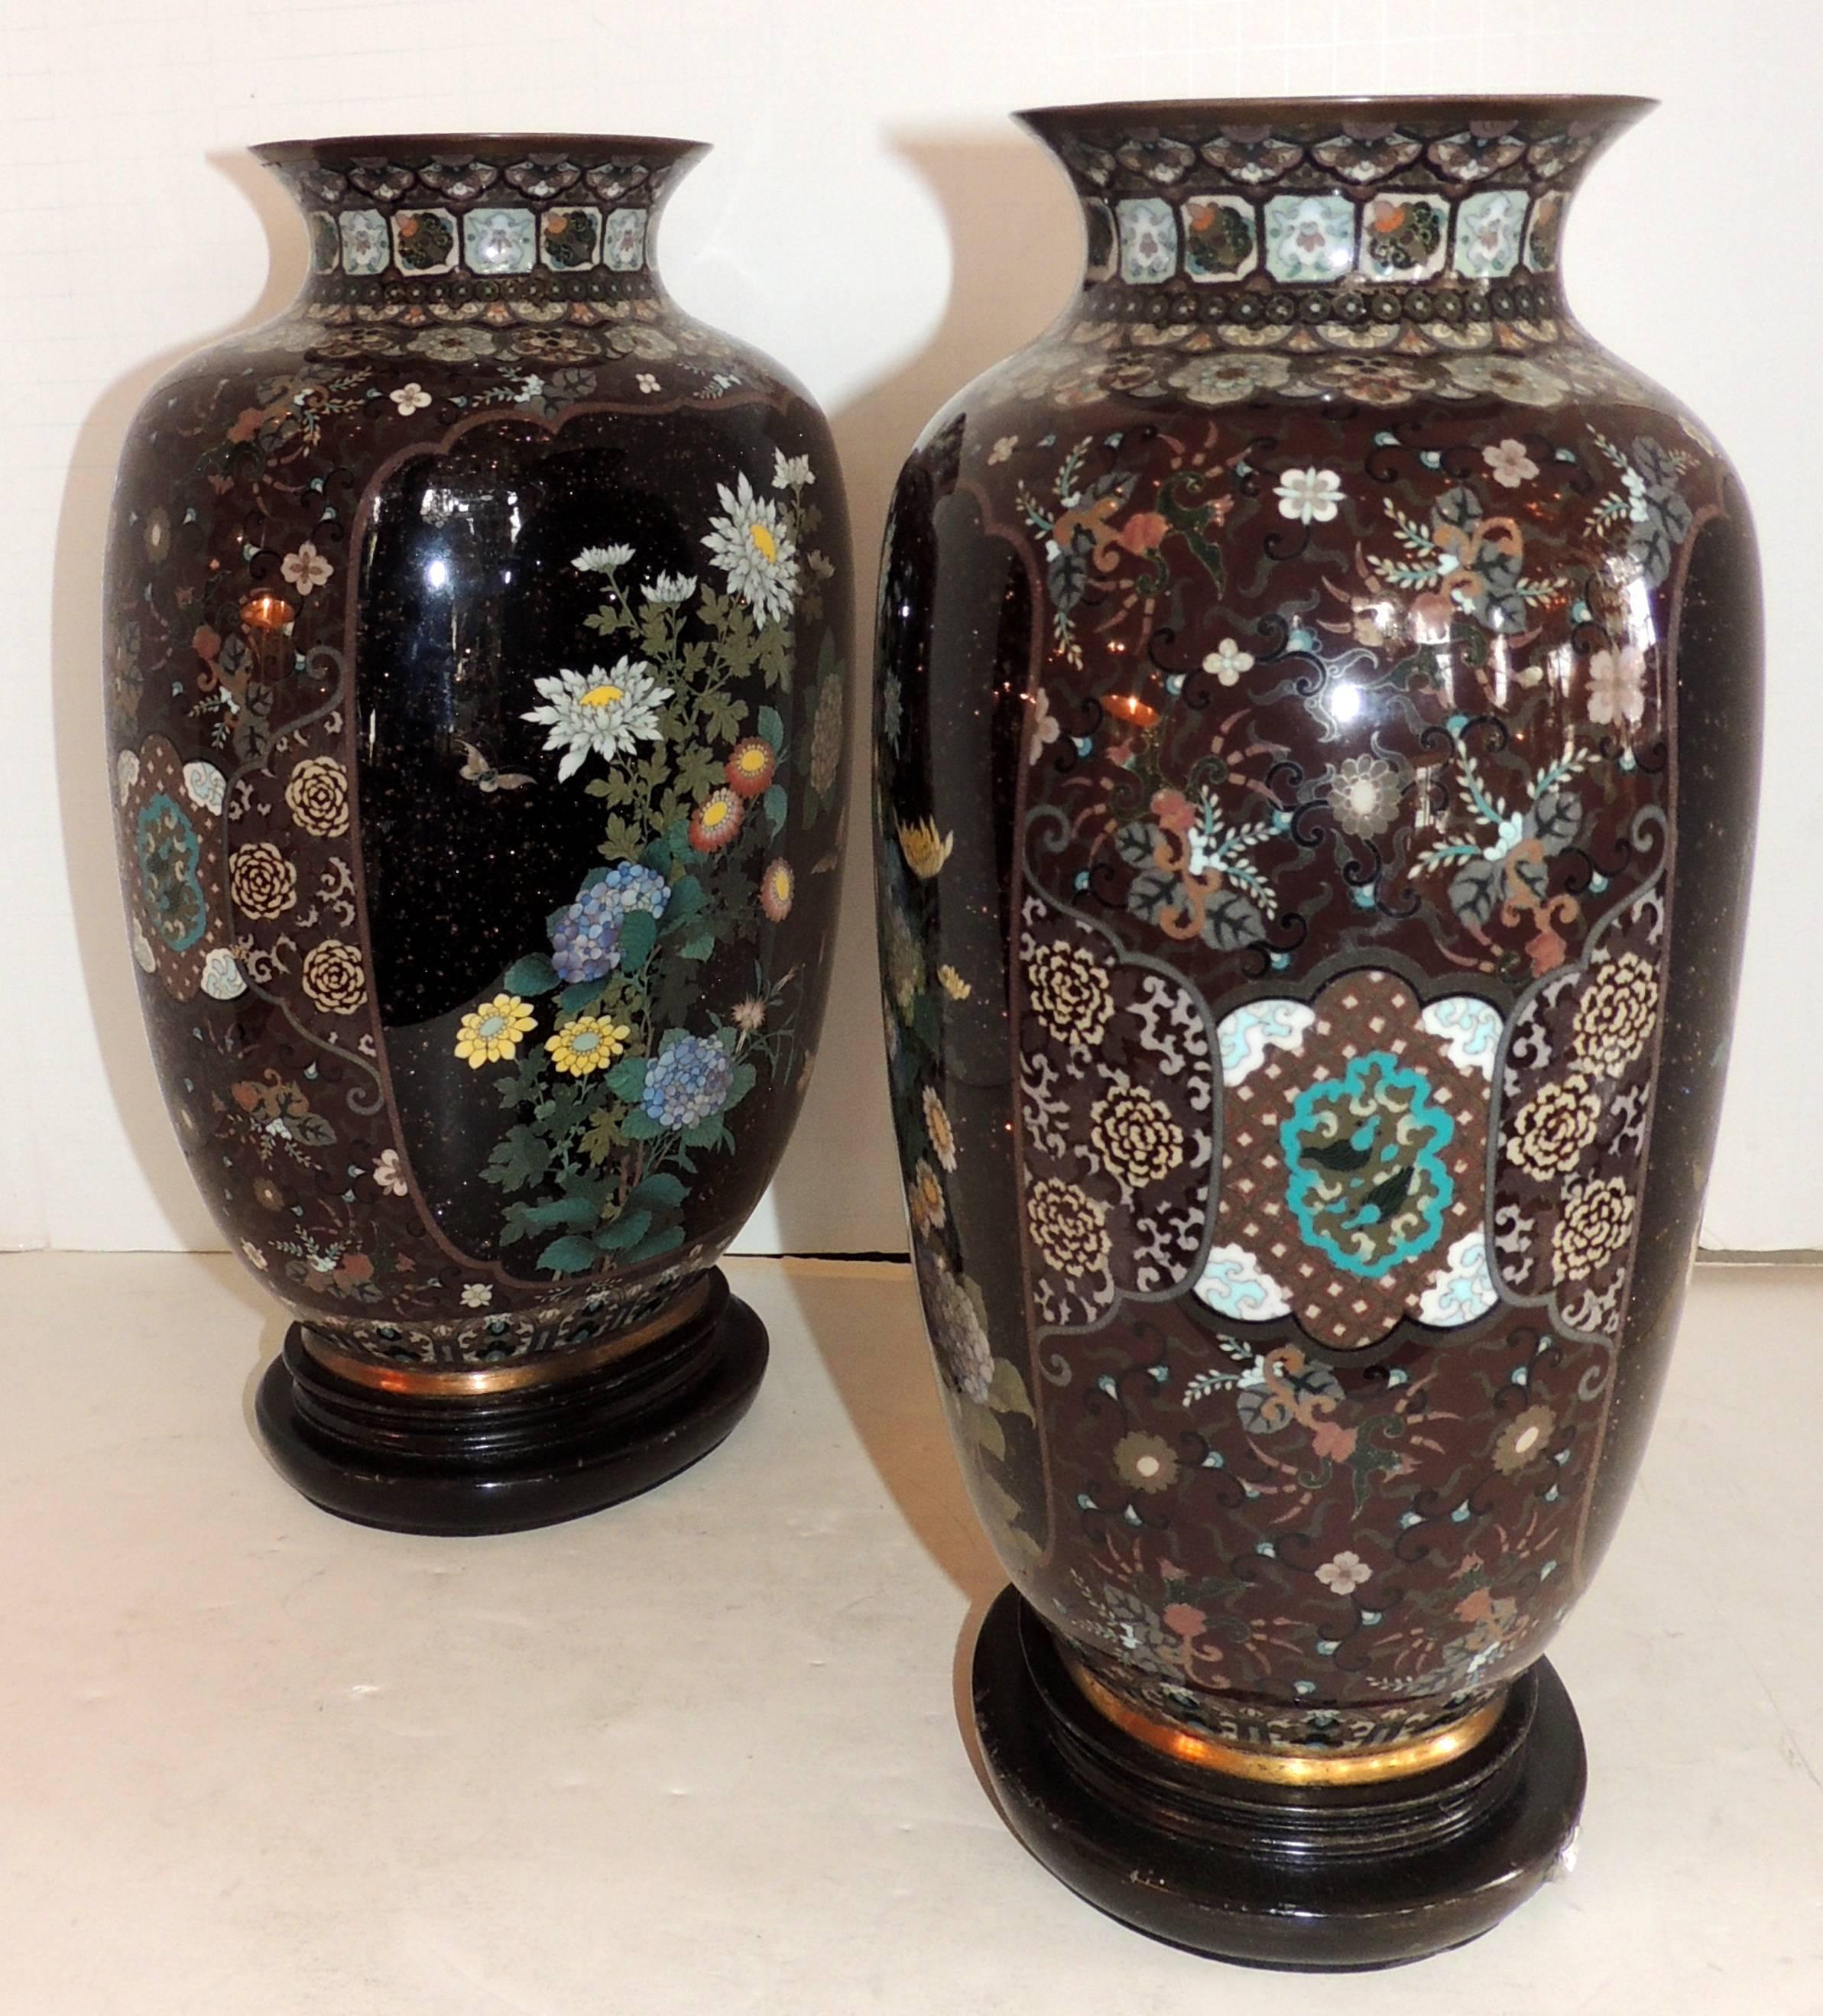 A wonderful pair of Japanese Meiji cloisonne enameled vases with flower bouquets and spray and is in an urn form previously drilled on the bottoms for lamps on wood bases.